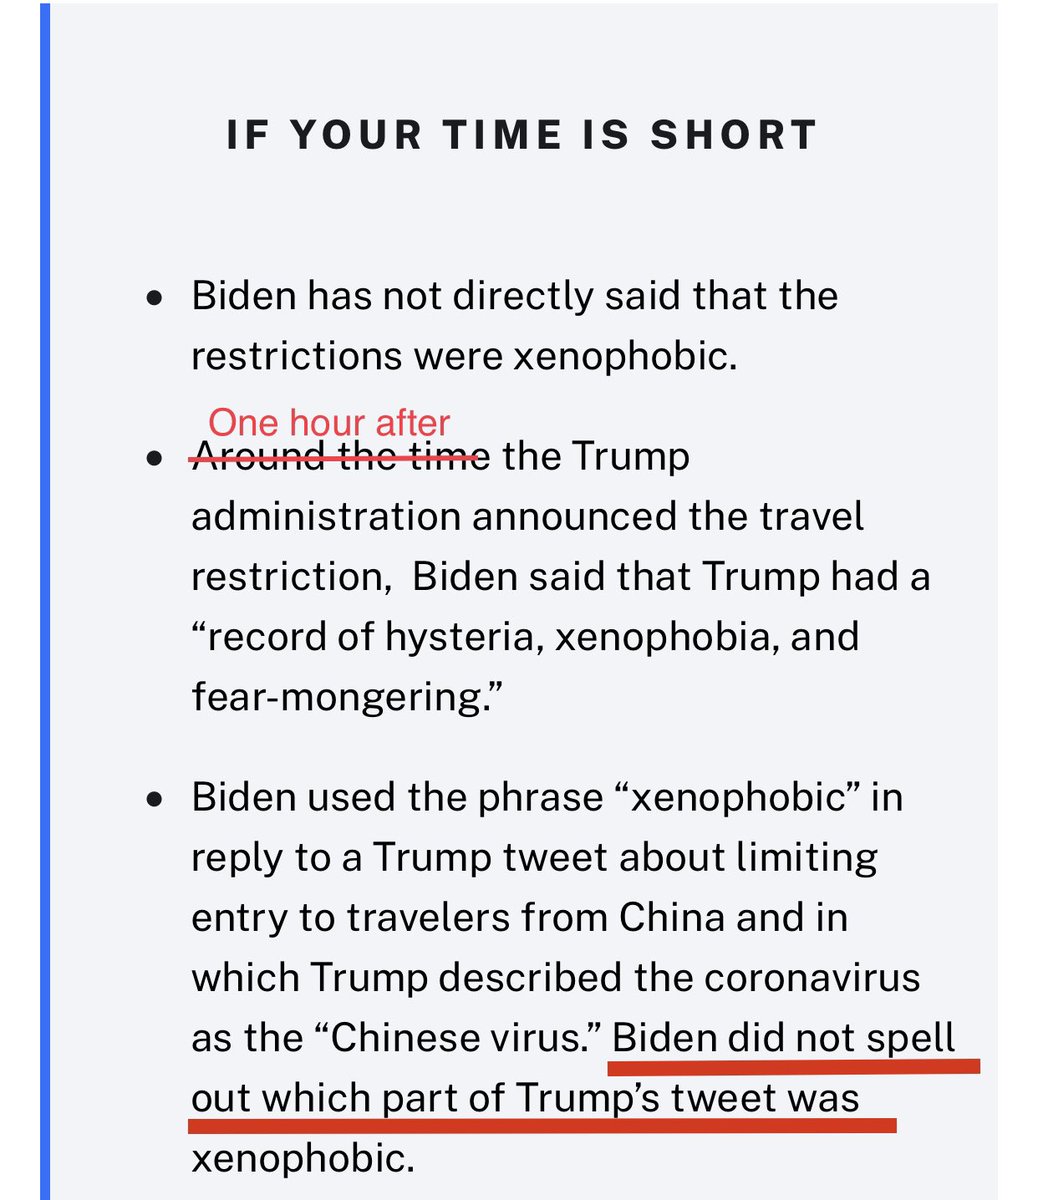 The Biden camp thinks they can get away with this because “fact-checkers” give him cover.Joe hasn’t “directly said” restrictions were xenophobic.. just called Trump that one hour after restrictions were announced. Also said it in reply to a tweet about them. But who knows?!